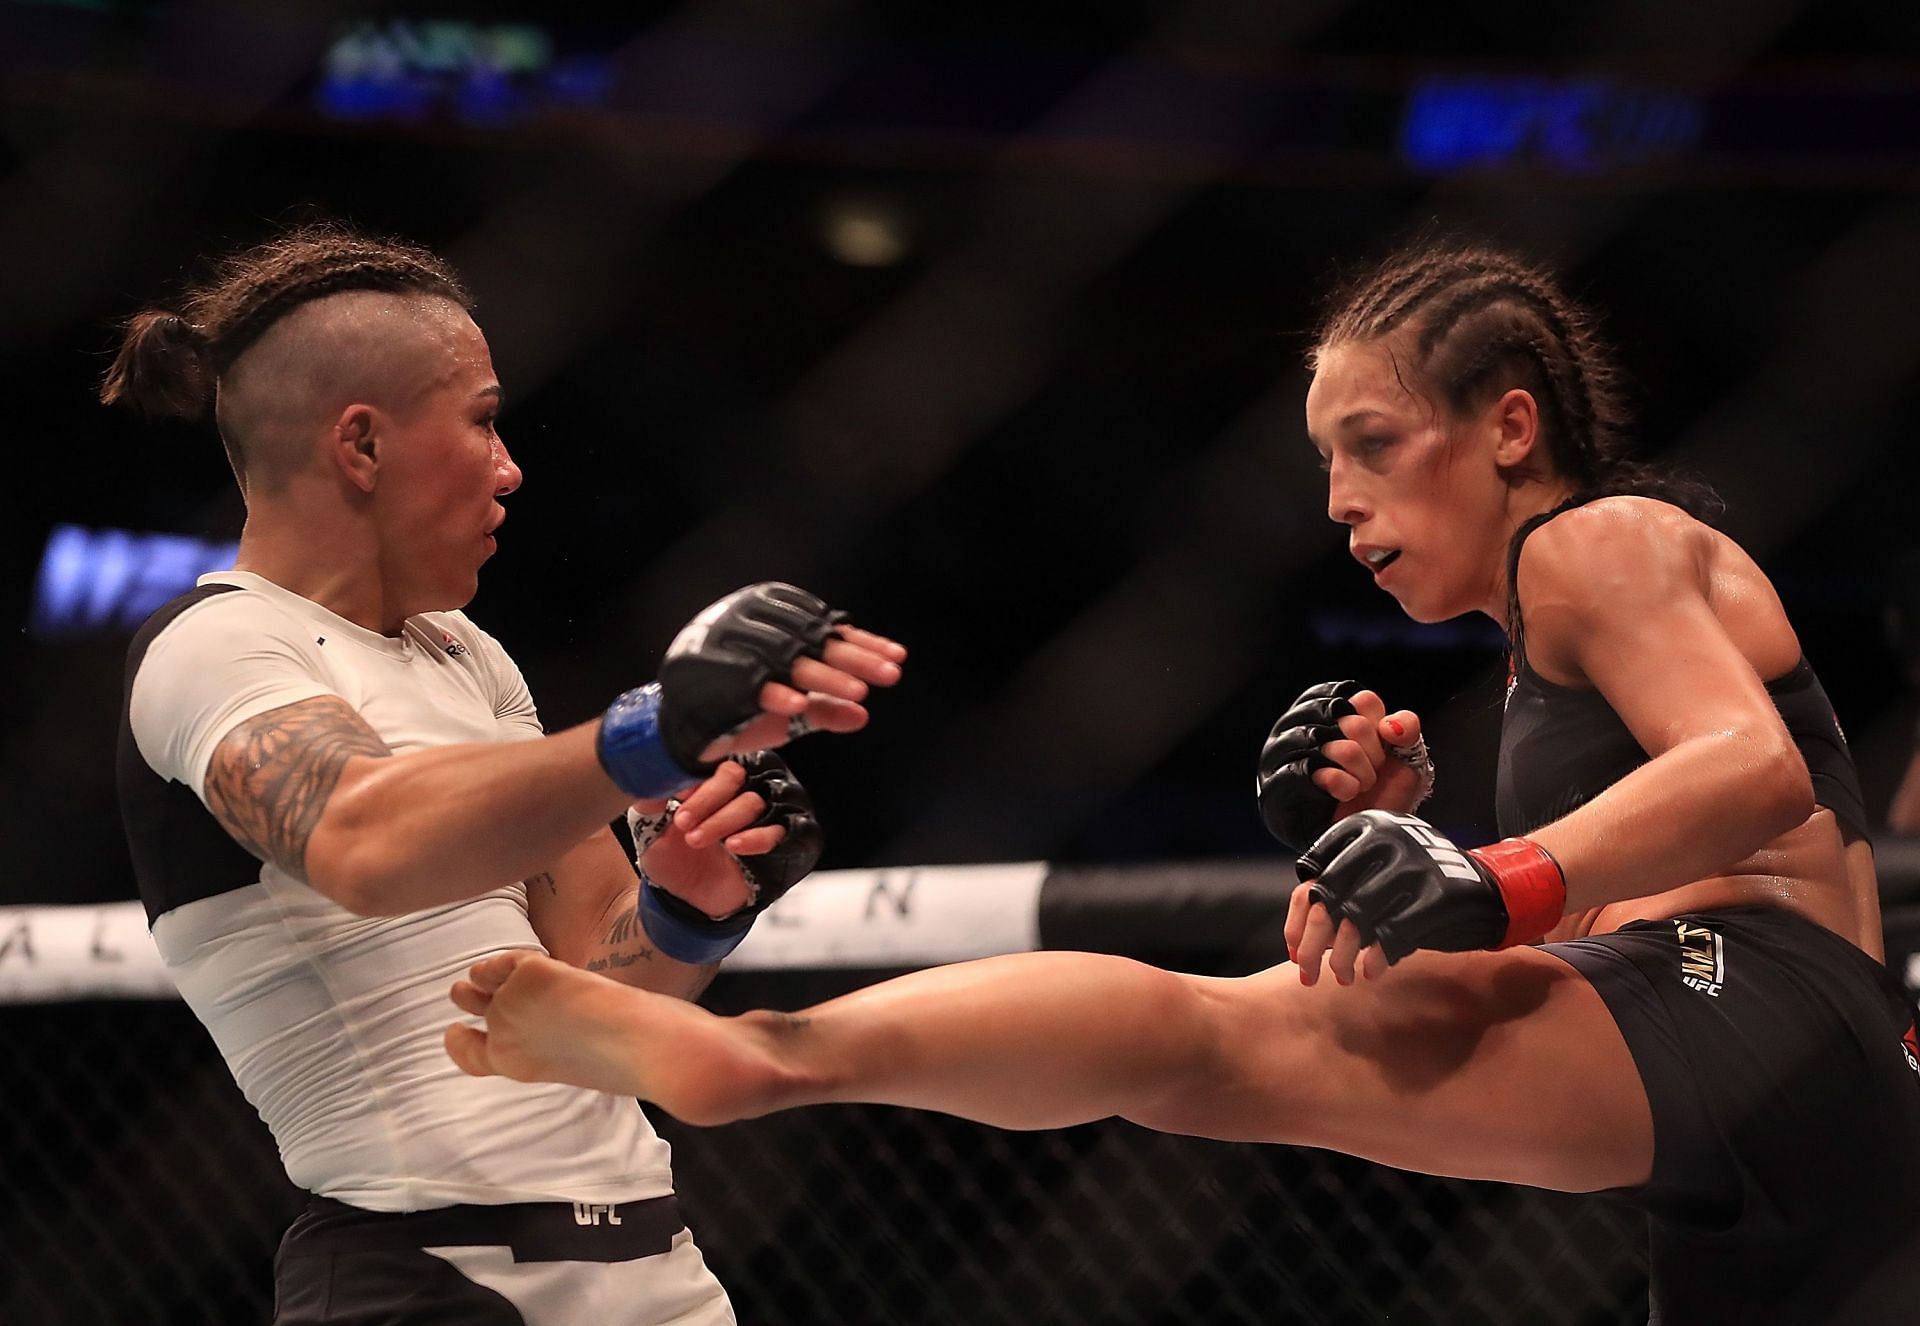 Jedrzejczyk and Andrade fought previously in May 2017